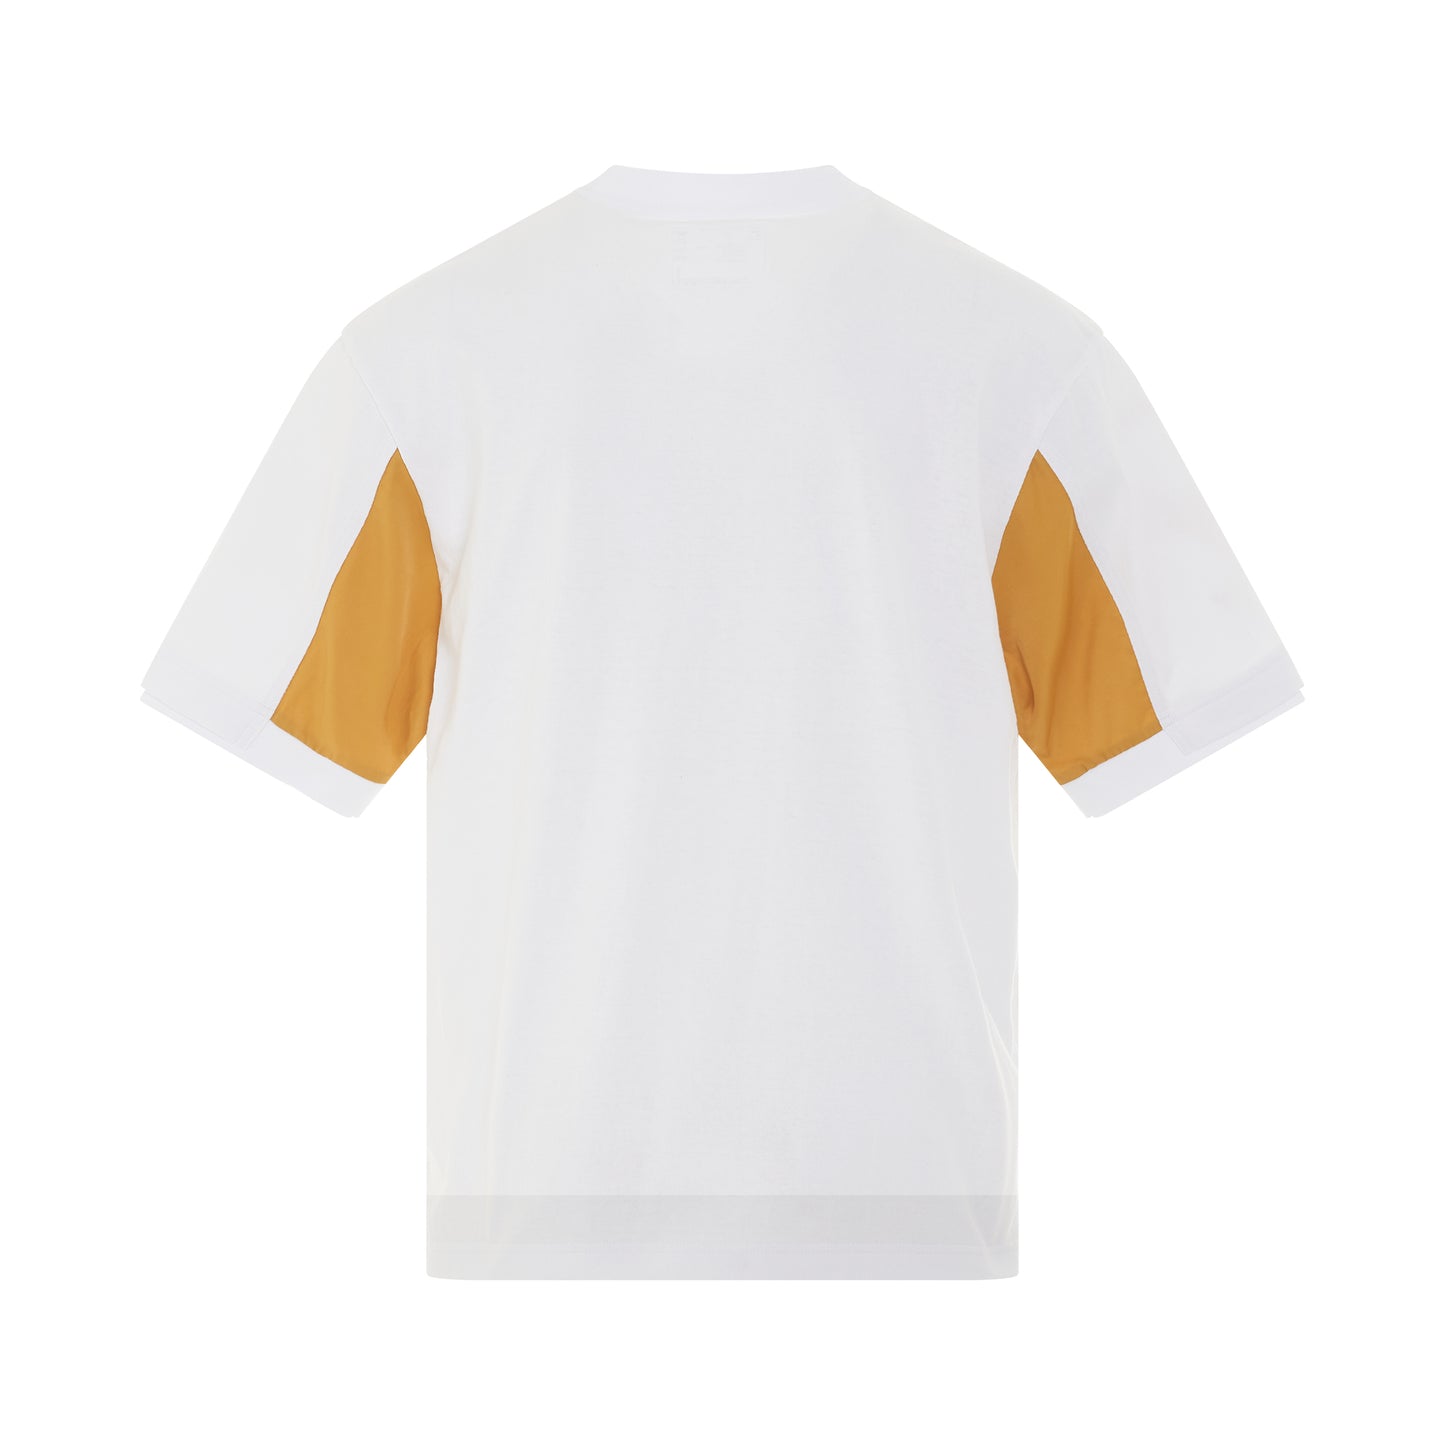 Cotton Twill T-Shirt with Pocket in White